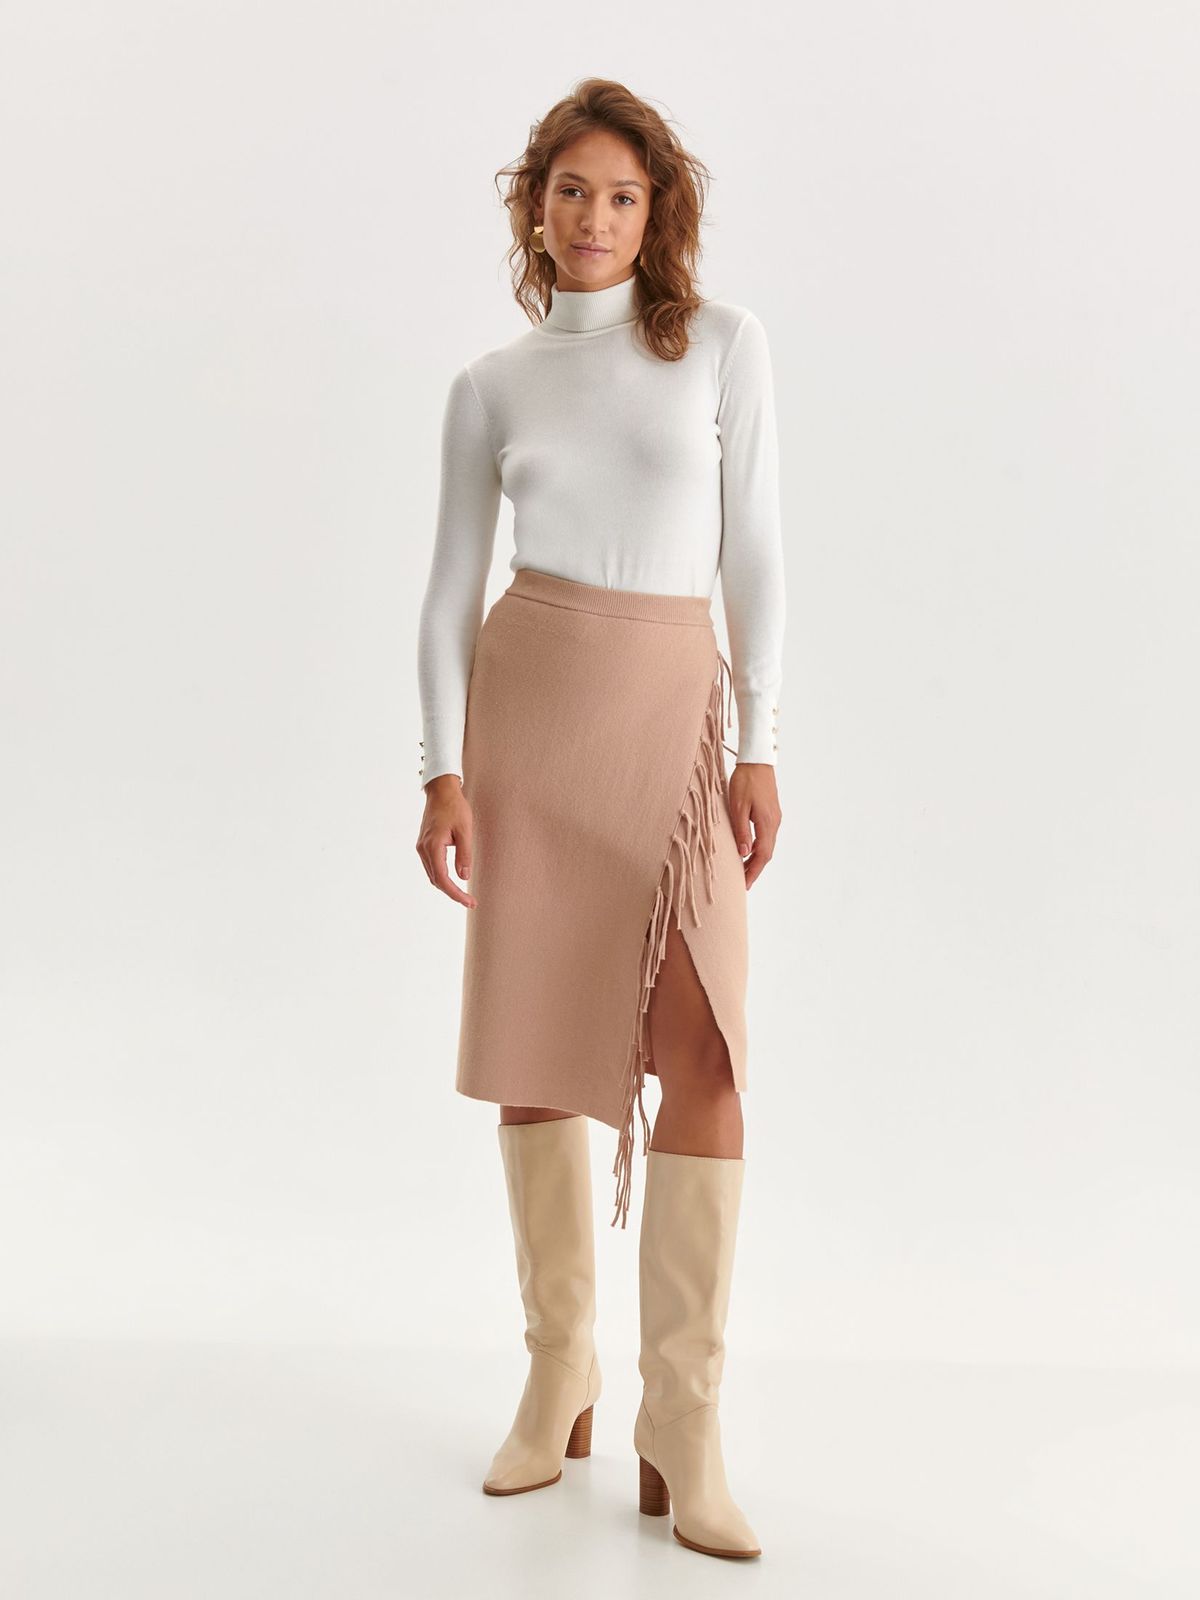 Cream skirt with fringes knitted pencil